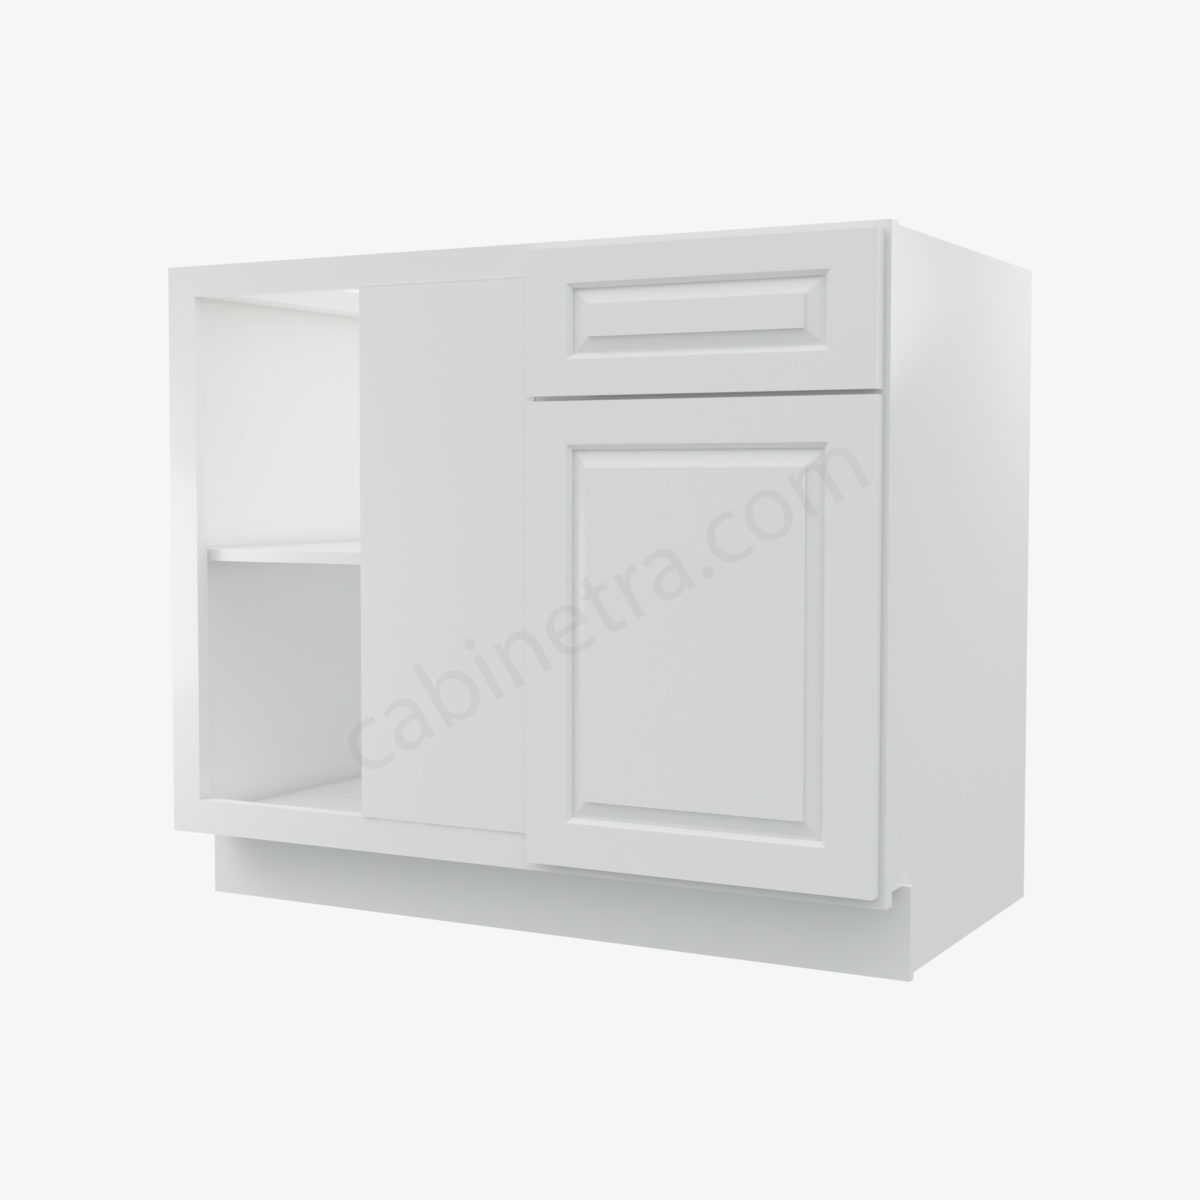 GW BBLC42 45 39W 0  Forevermark Gramercy White Cabinetra scaled